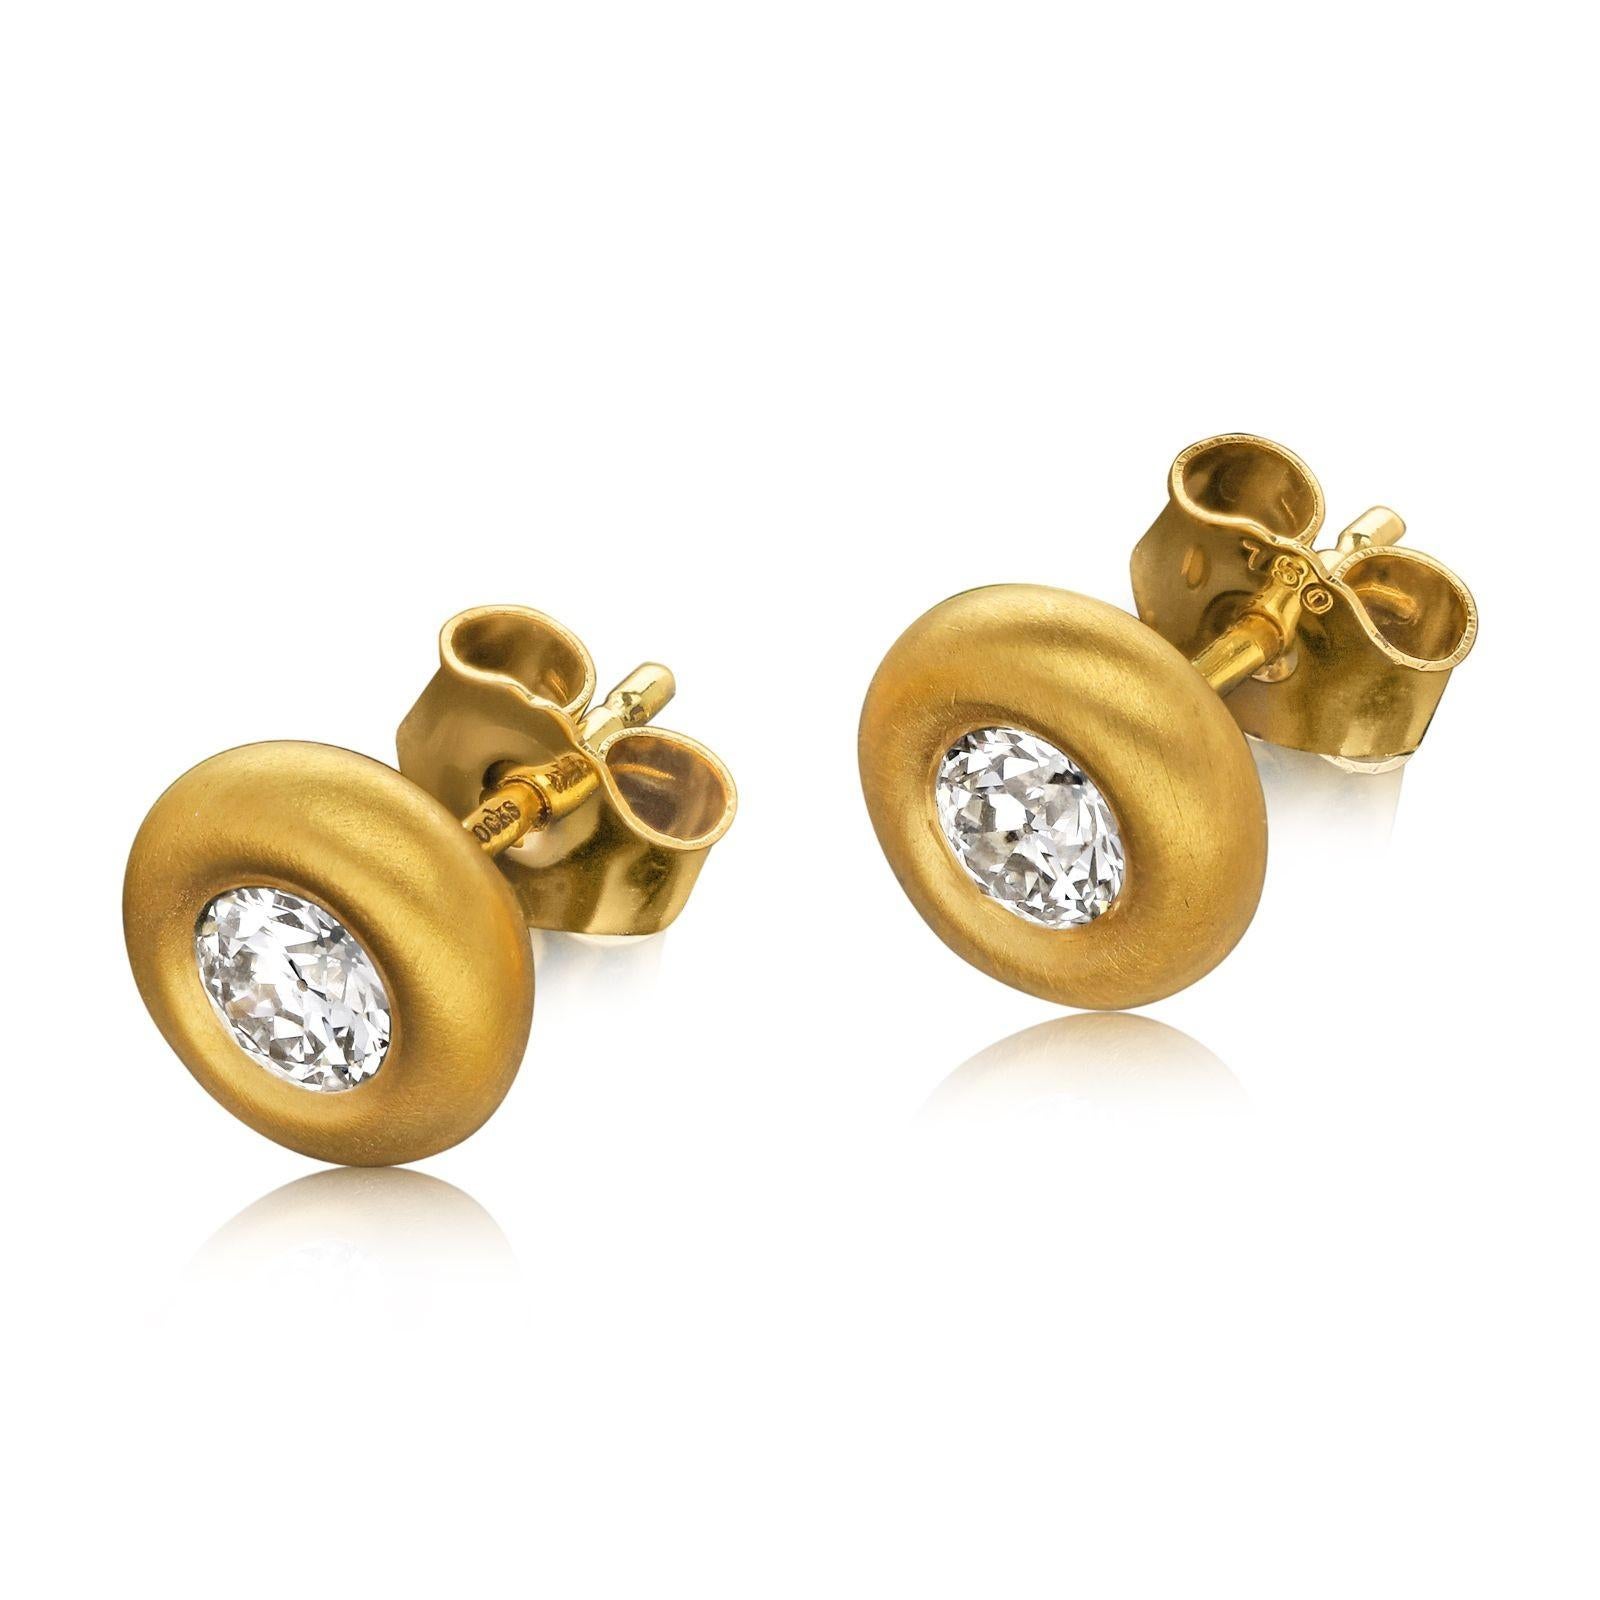 A beautiful pair of old cut diamond and yellow gold earrings by Hancocks, each earring set with an old European brilliant cut diamond weighing 0.30cts each and of H/I colour and VS clarity, bezel set within a rounded doughnut-style setting in satin